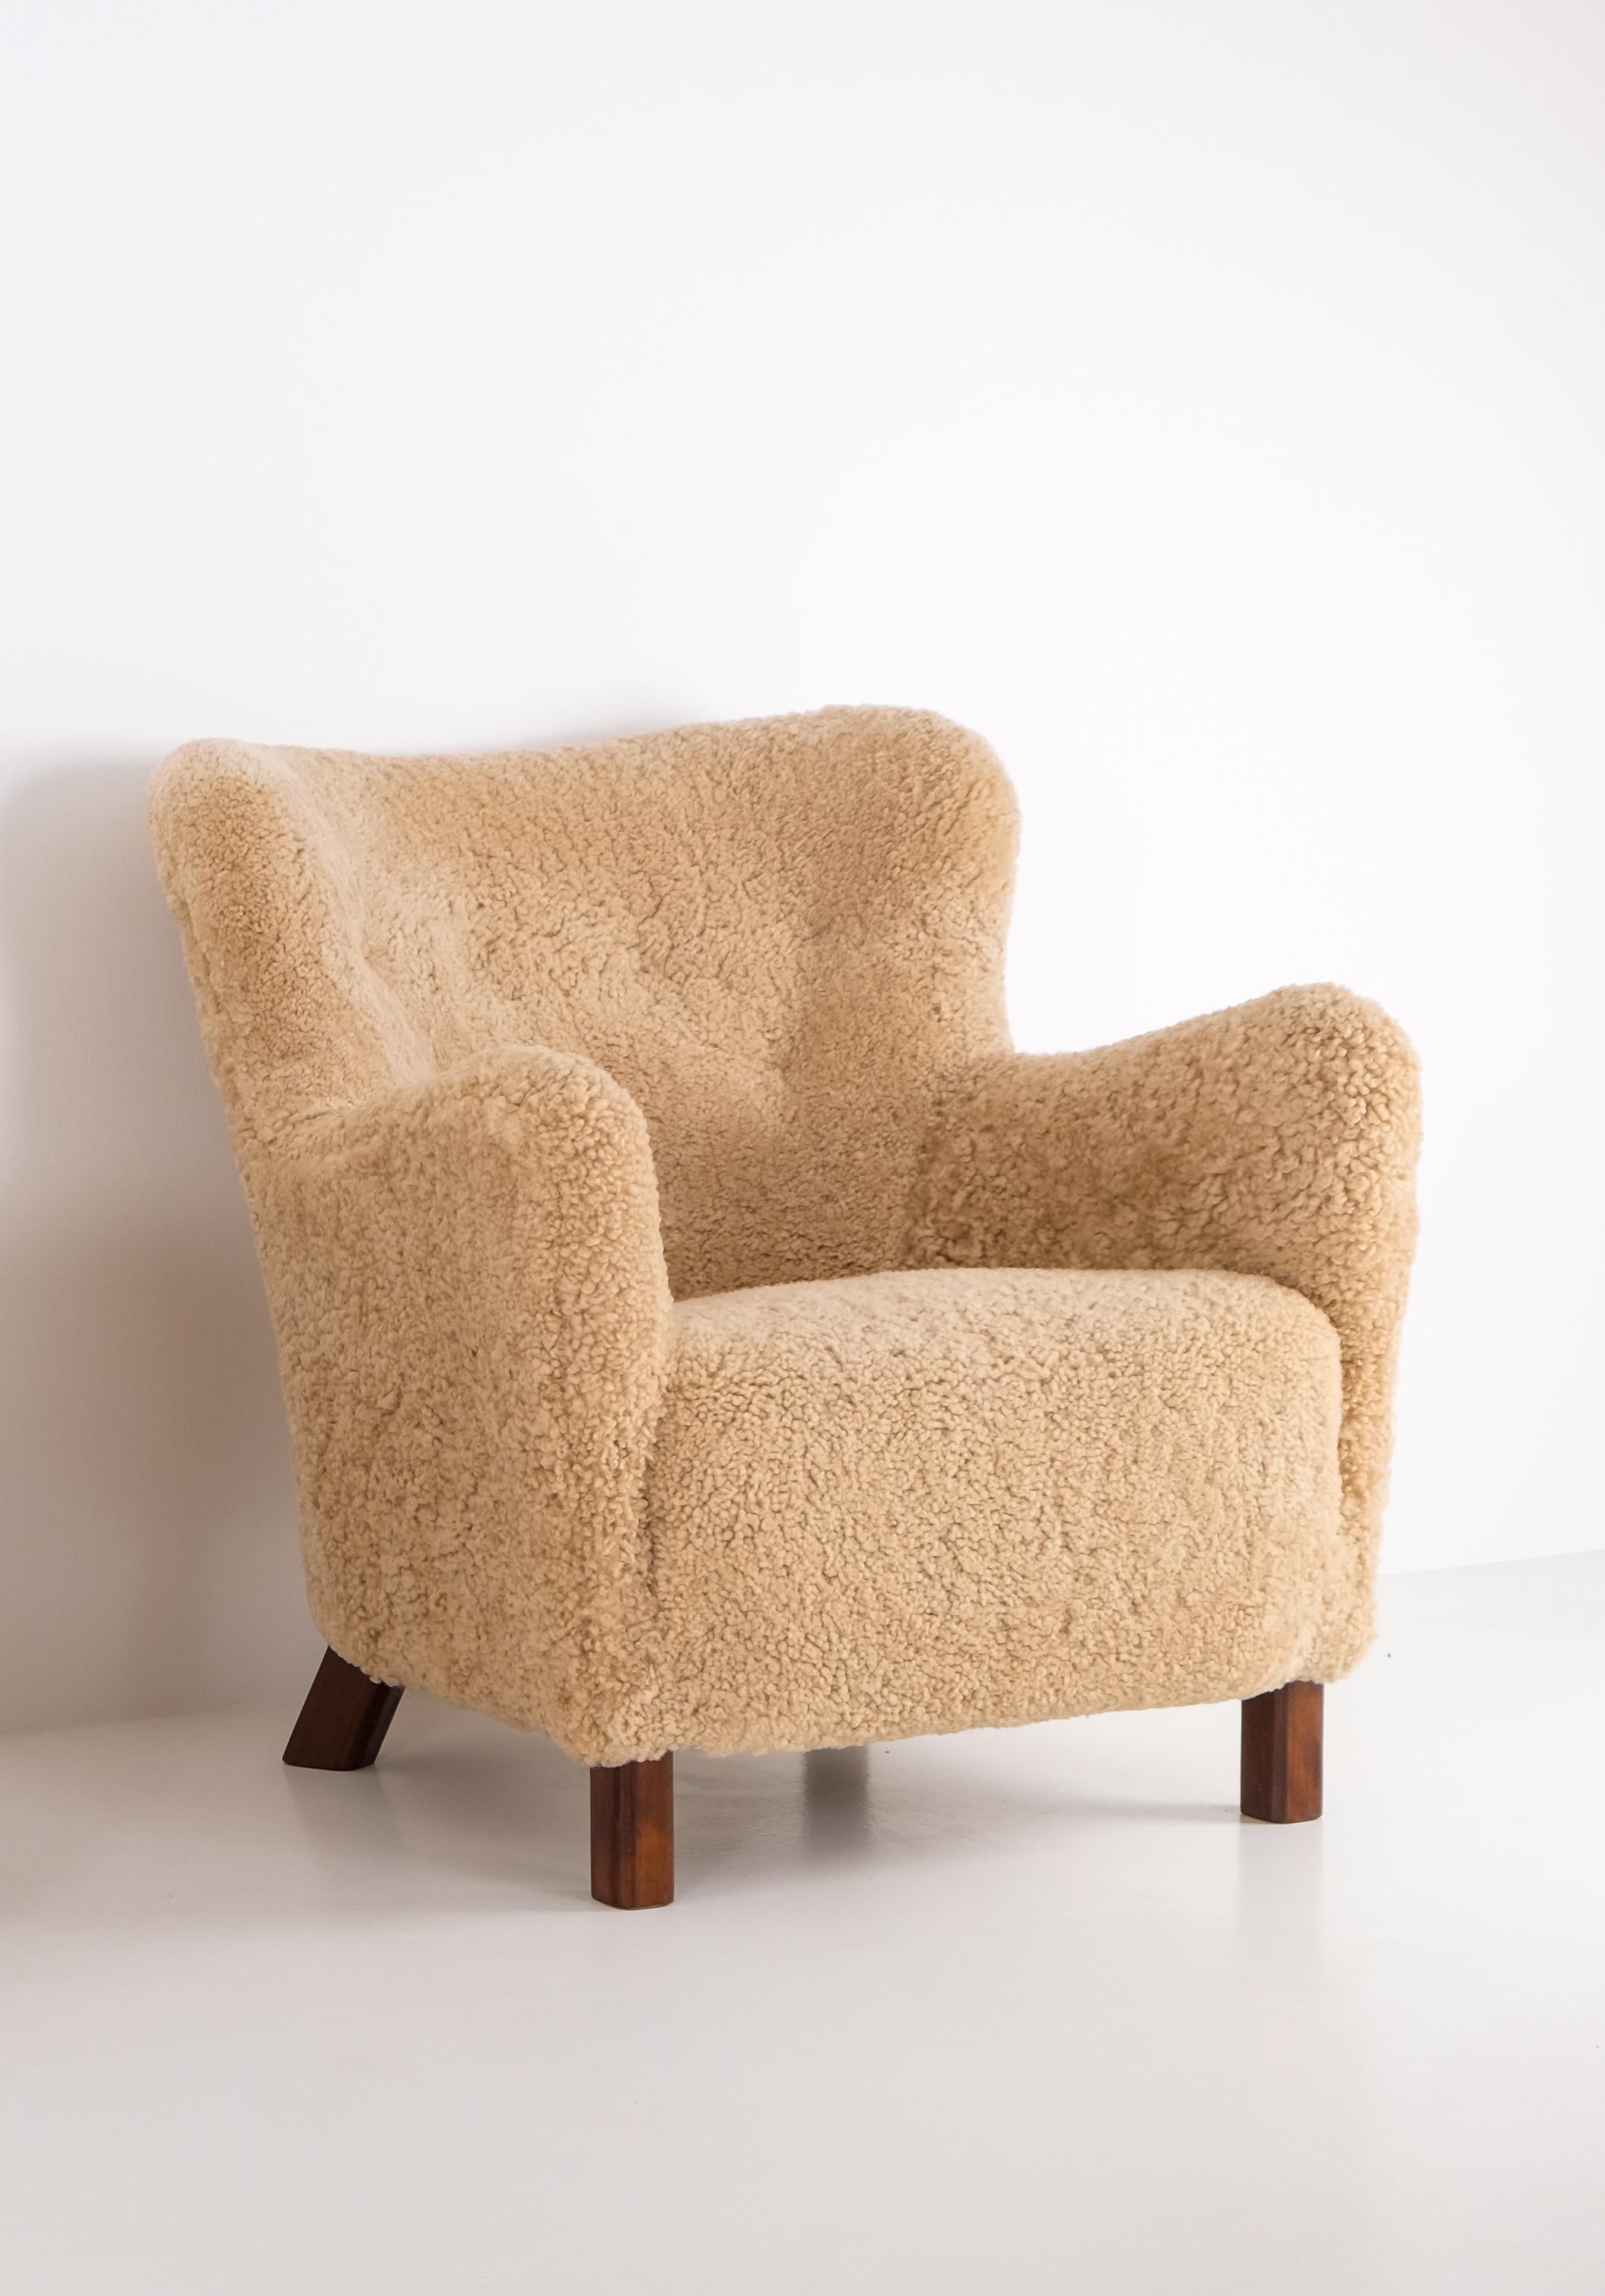 Newly upholstered in honey colored sheepskin. Produced by Fritz Hansen in Denmark, 1940s. 
Very good condition.